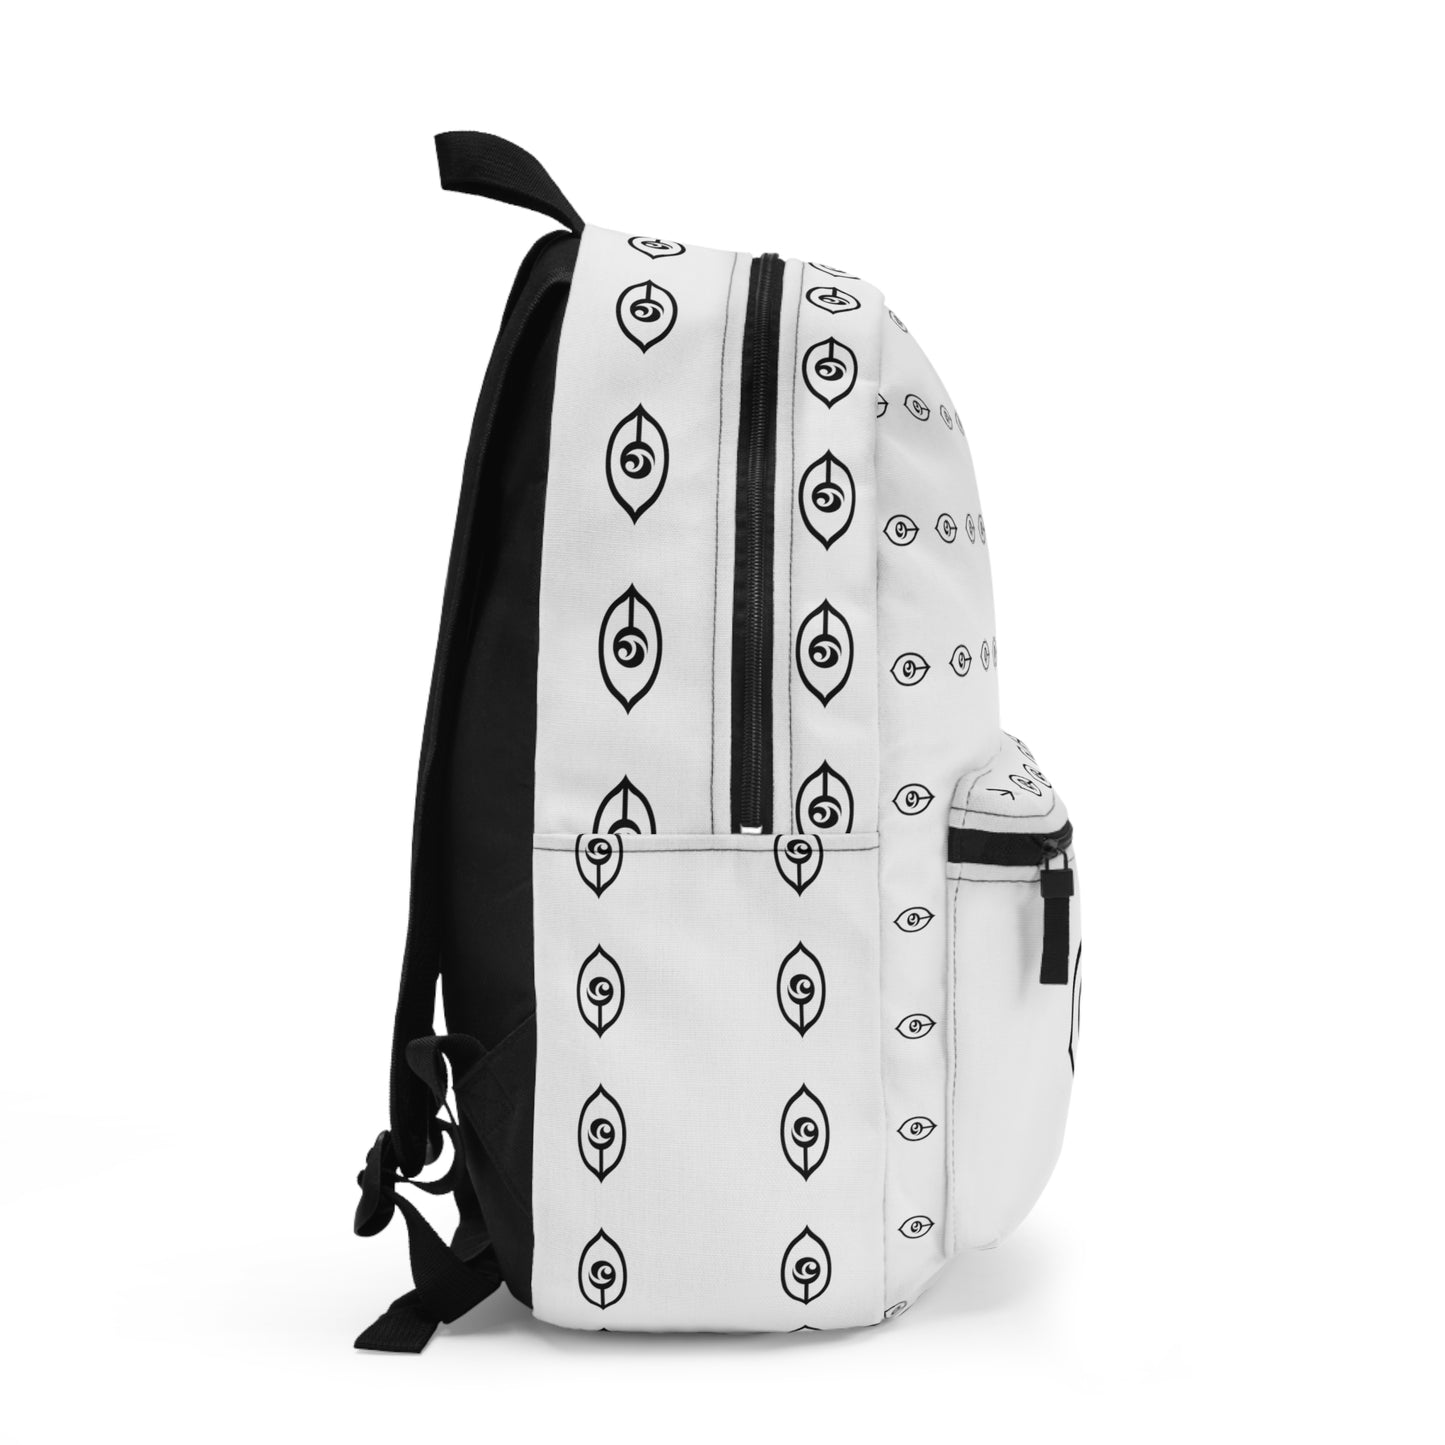 Cymarshall Law CyVision Backpack